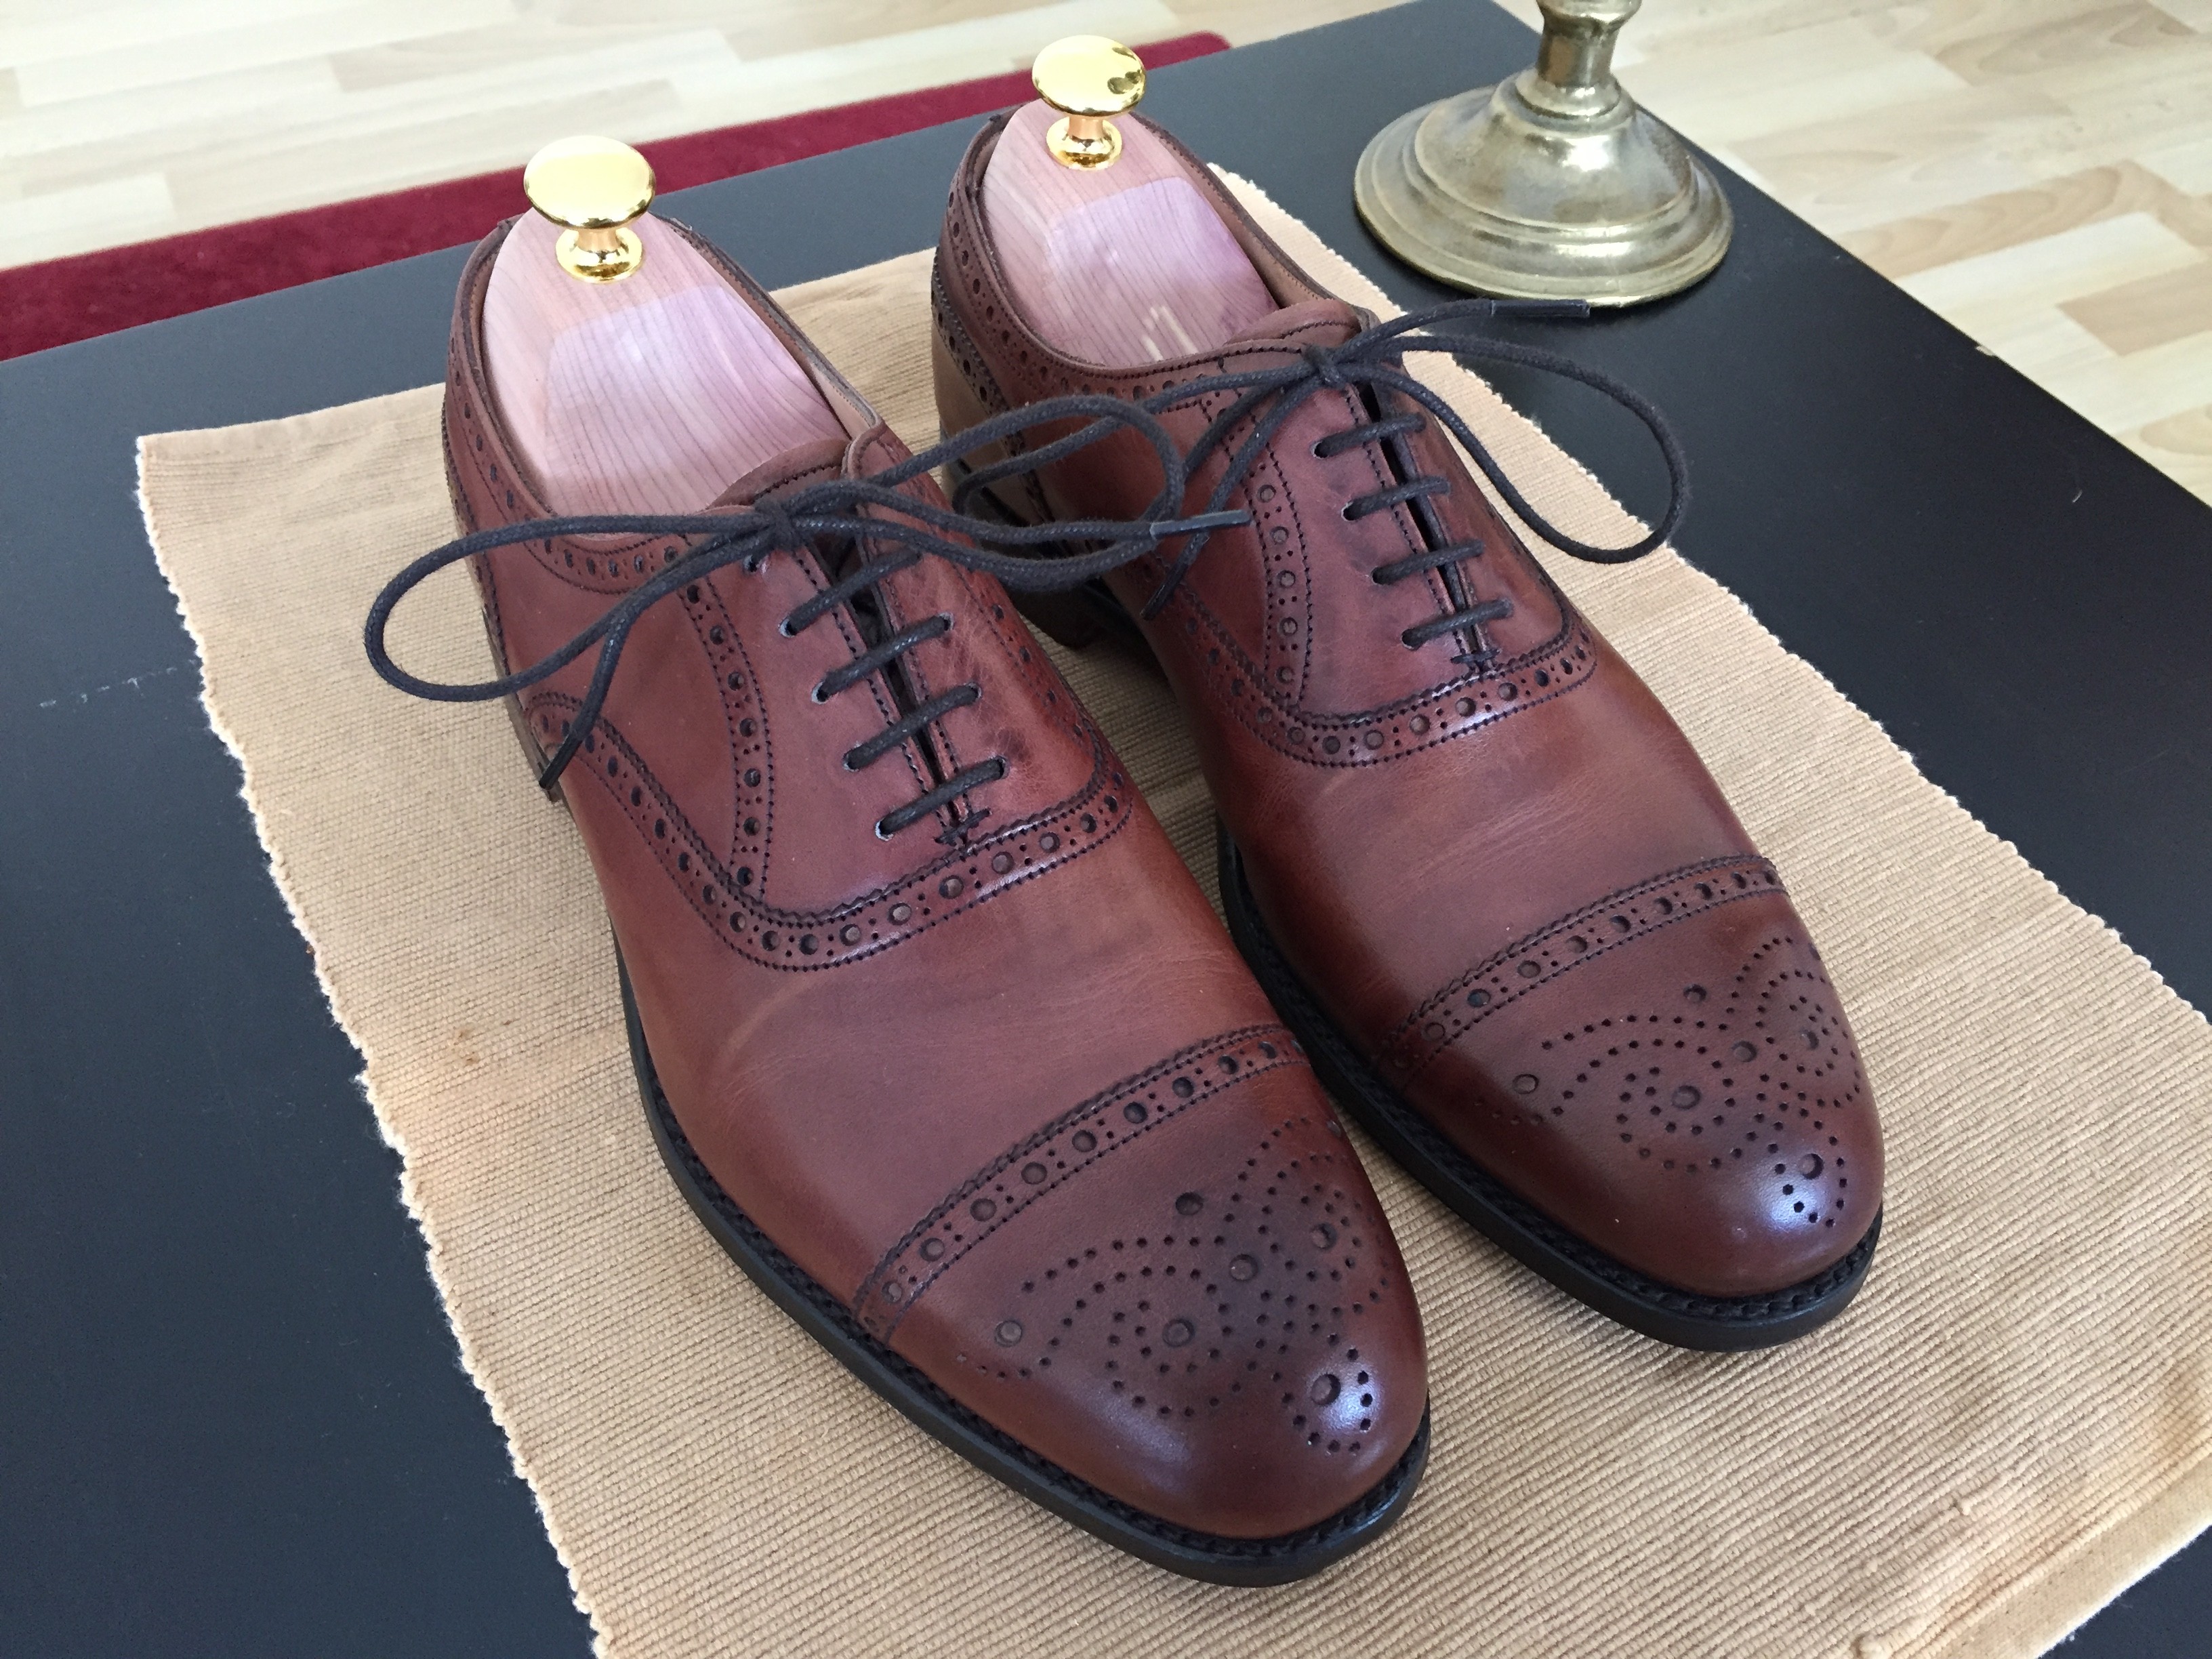 cheaney 214 last